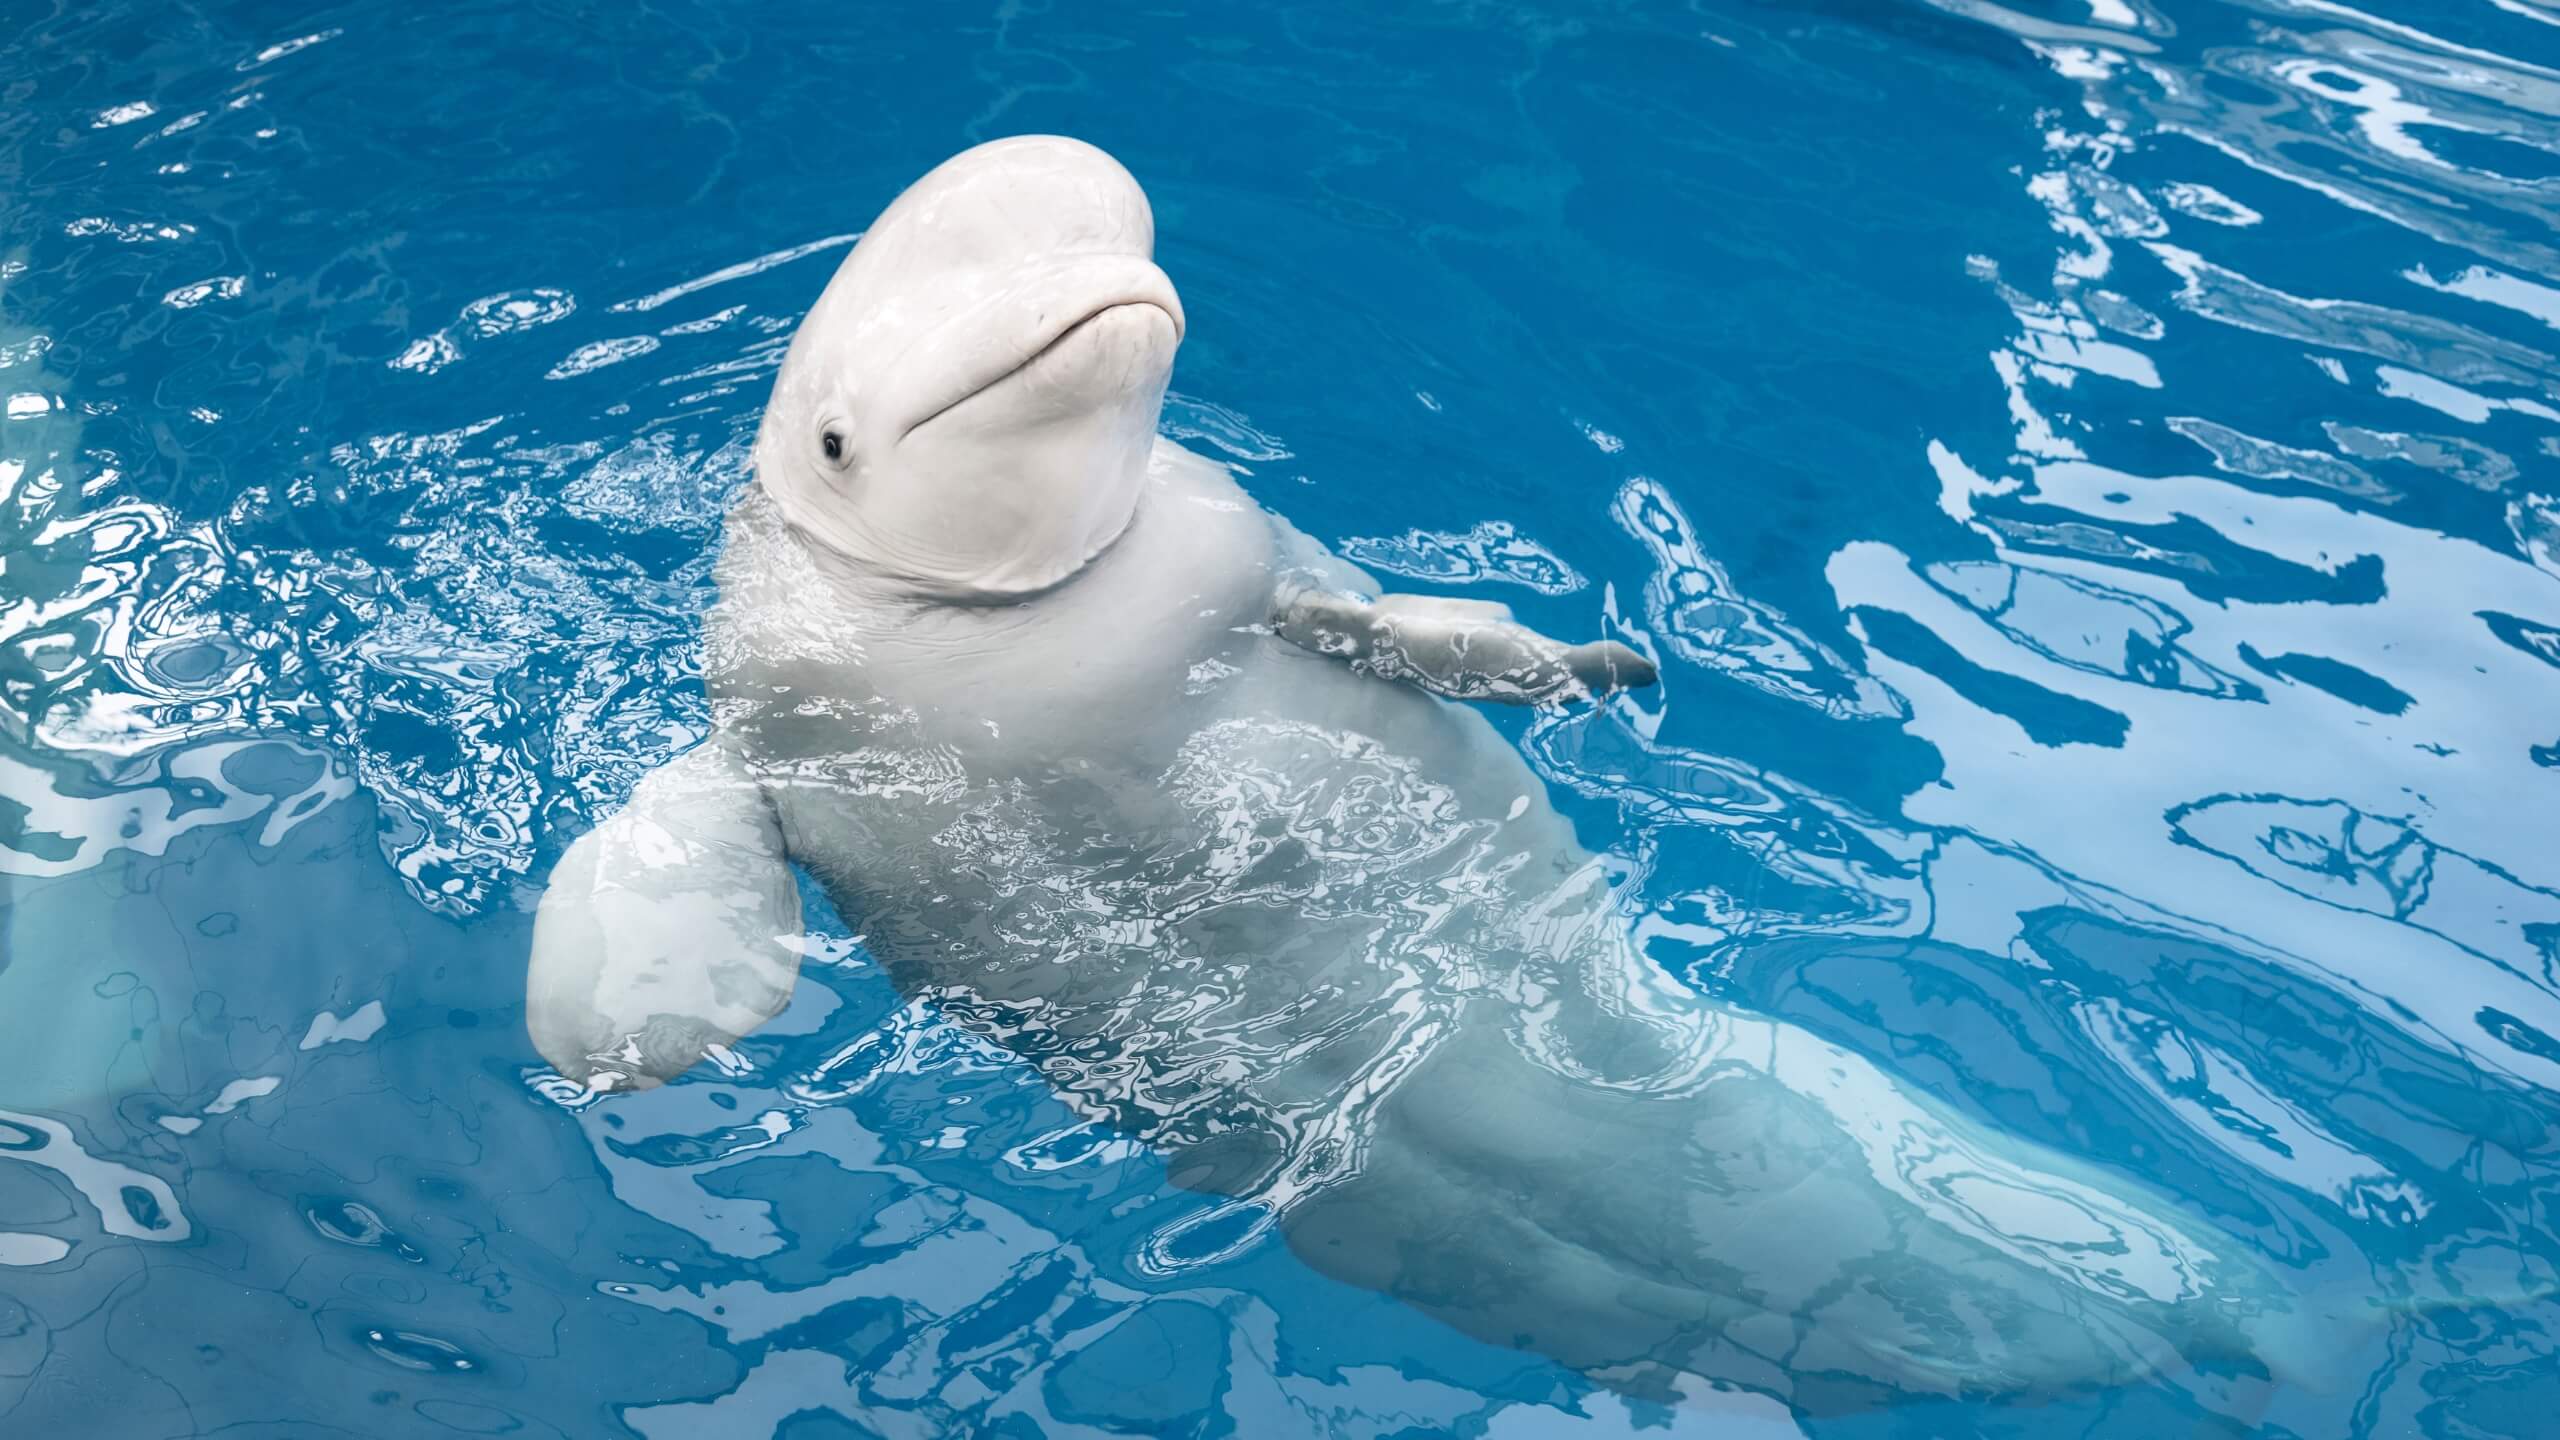 Beluga whales are typically fed a diet of herring, capelin and smelt. These fish provide essential nutrients such as omega-3 fatty acids, minerals and vitamins that help keep the belugas healthy.